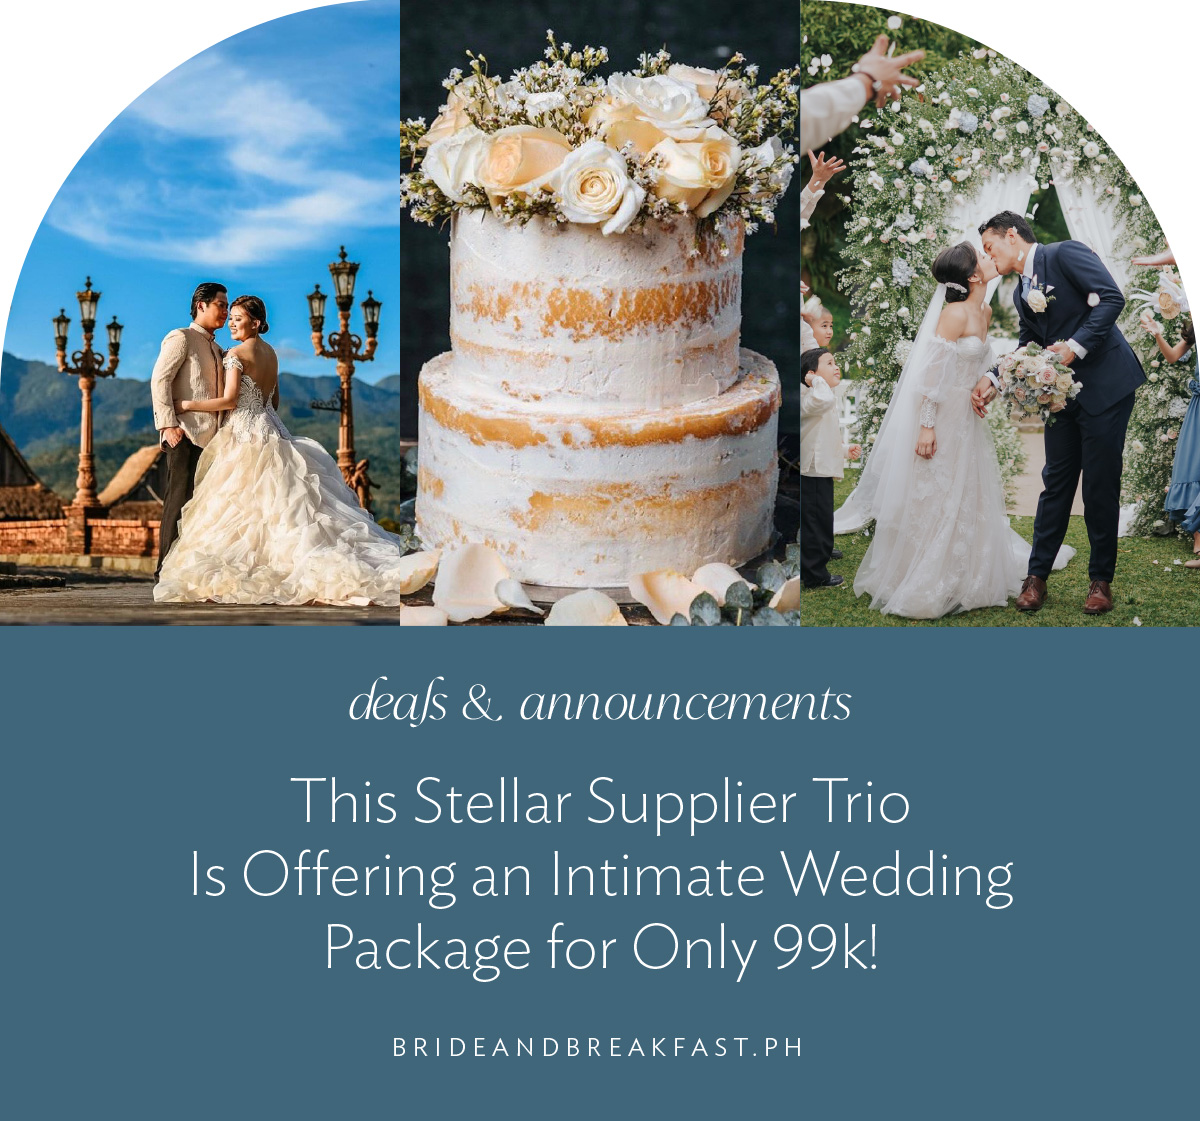 This Stellar Supplier Trio Is Offering an Intimate Wedding Package for Only 99k!